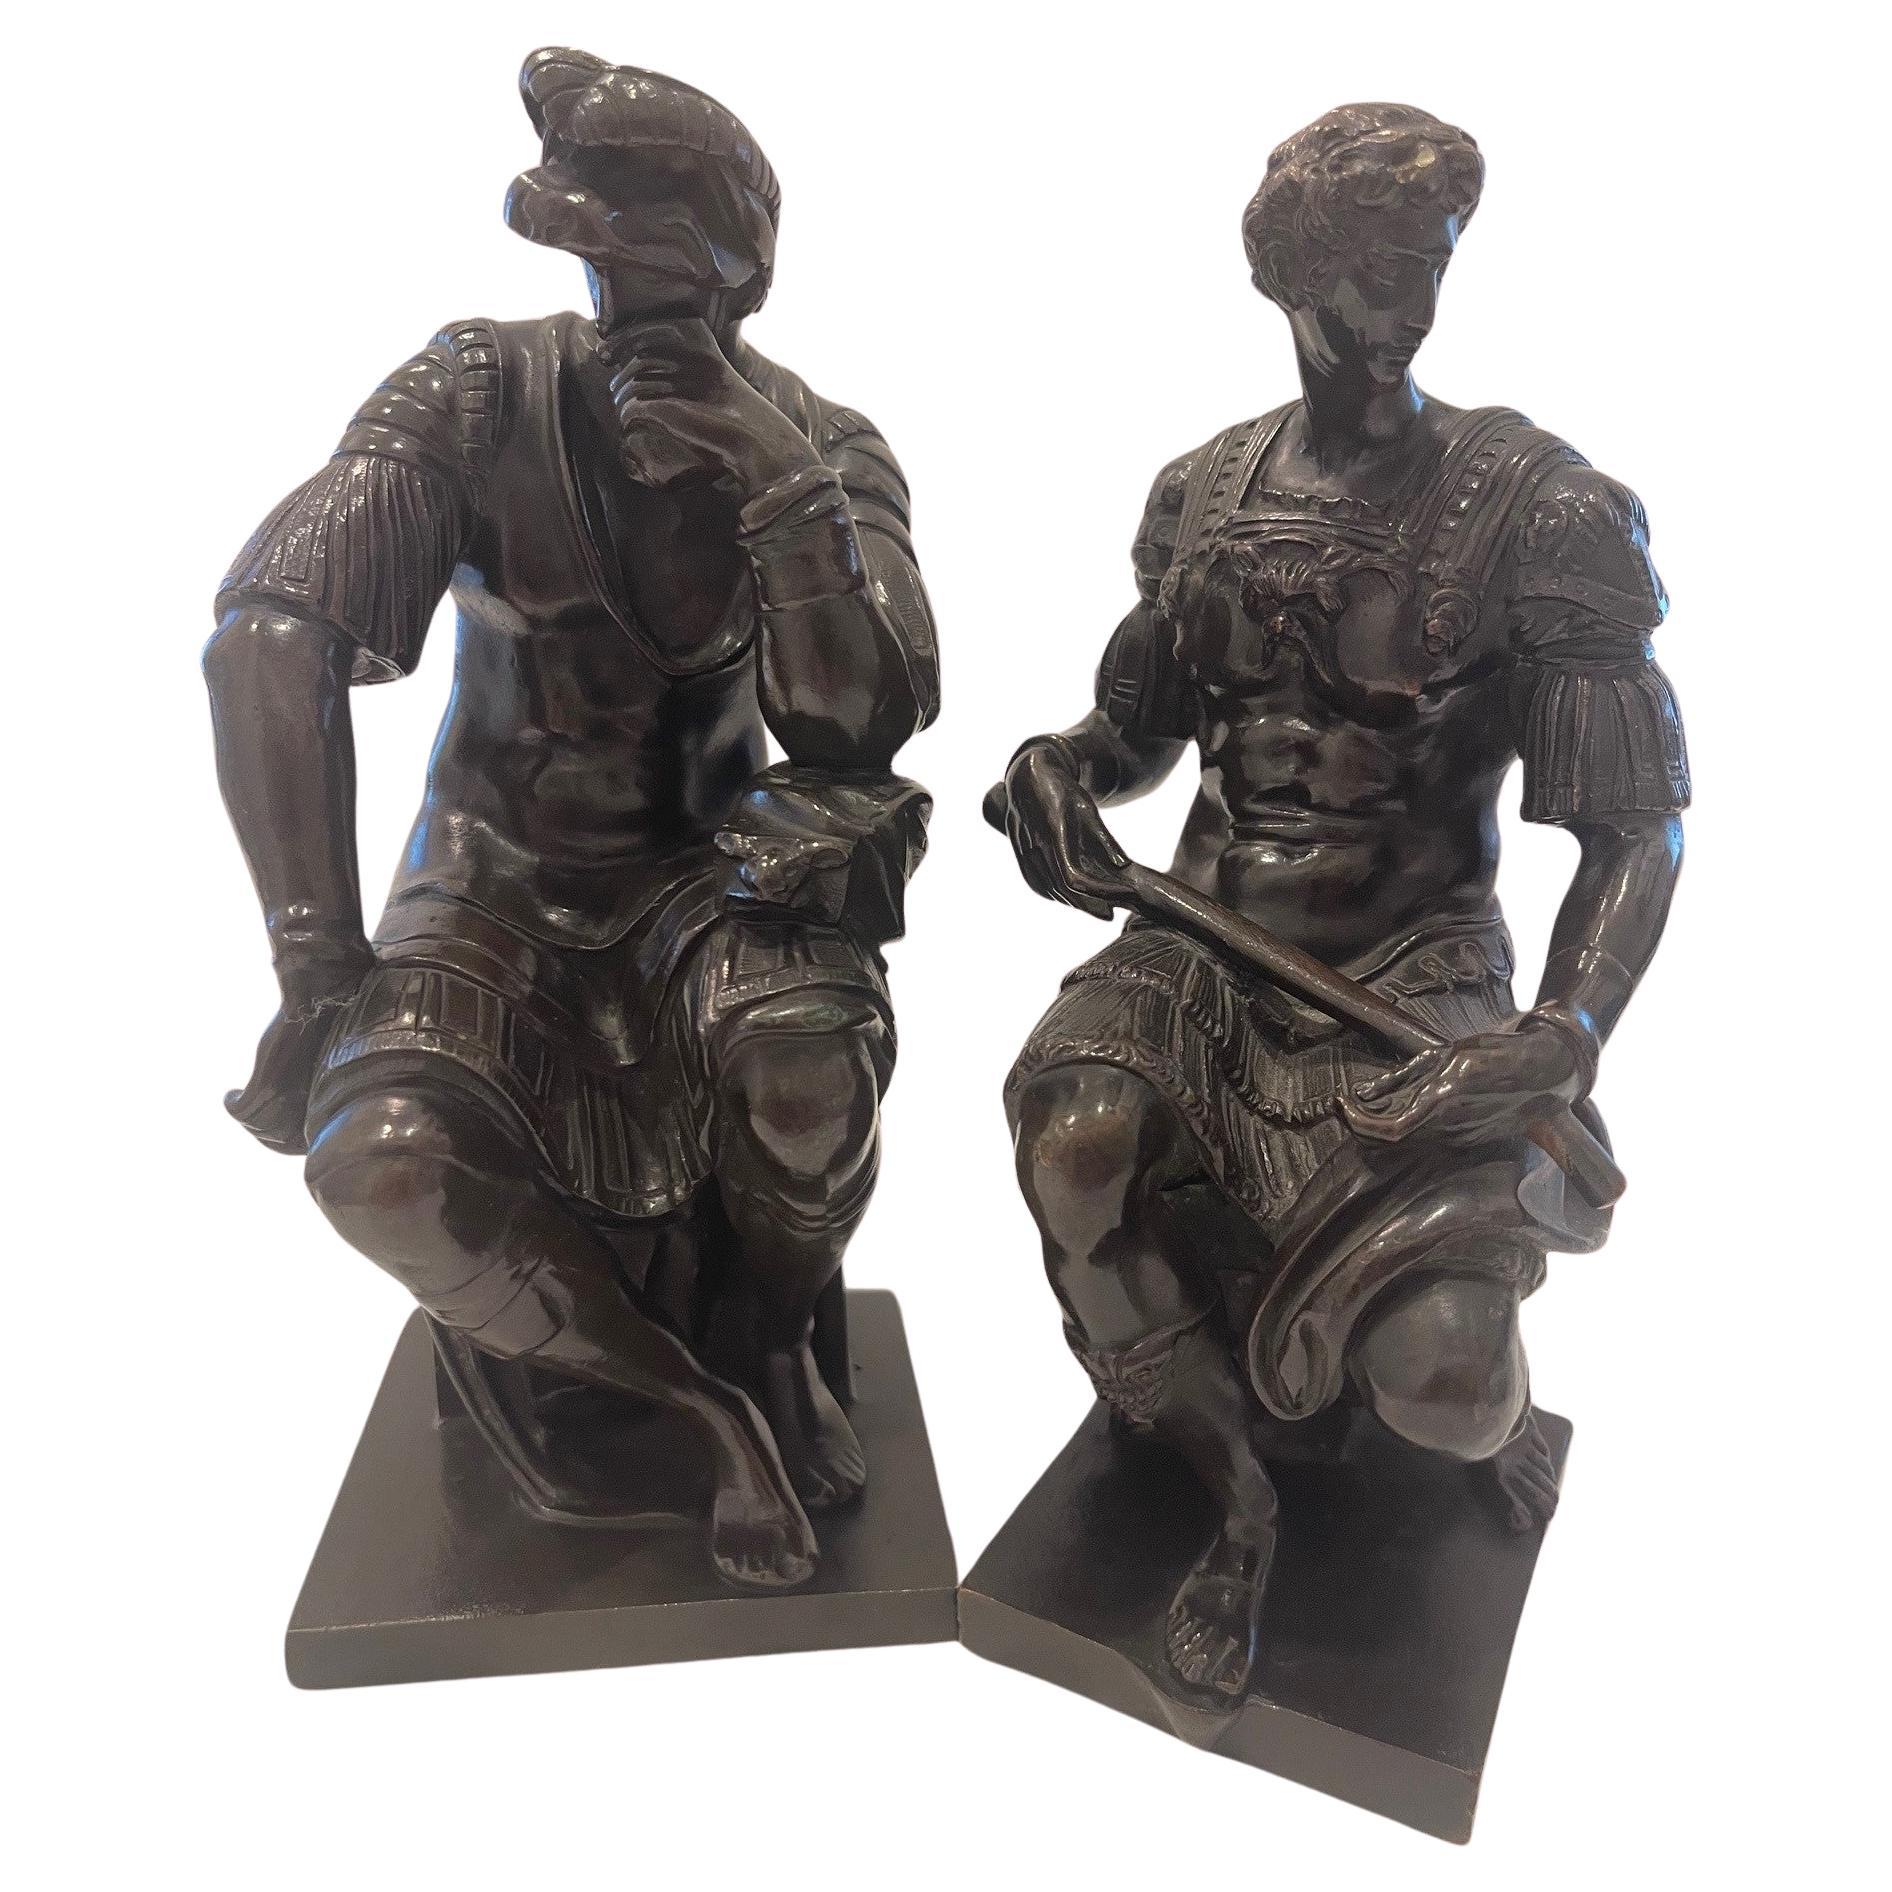 This is a wonderful pair of French bronzes, Lorenzo di' Piero de' Medici also known as Lorenzo the Magnificent, and his younger brother Giuliano. Lorenzo is the larger of the two figures measuring 8.3